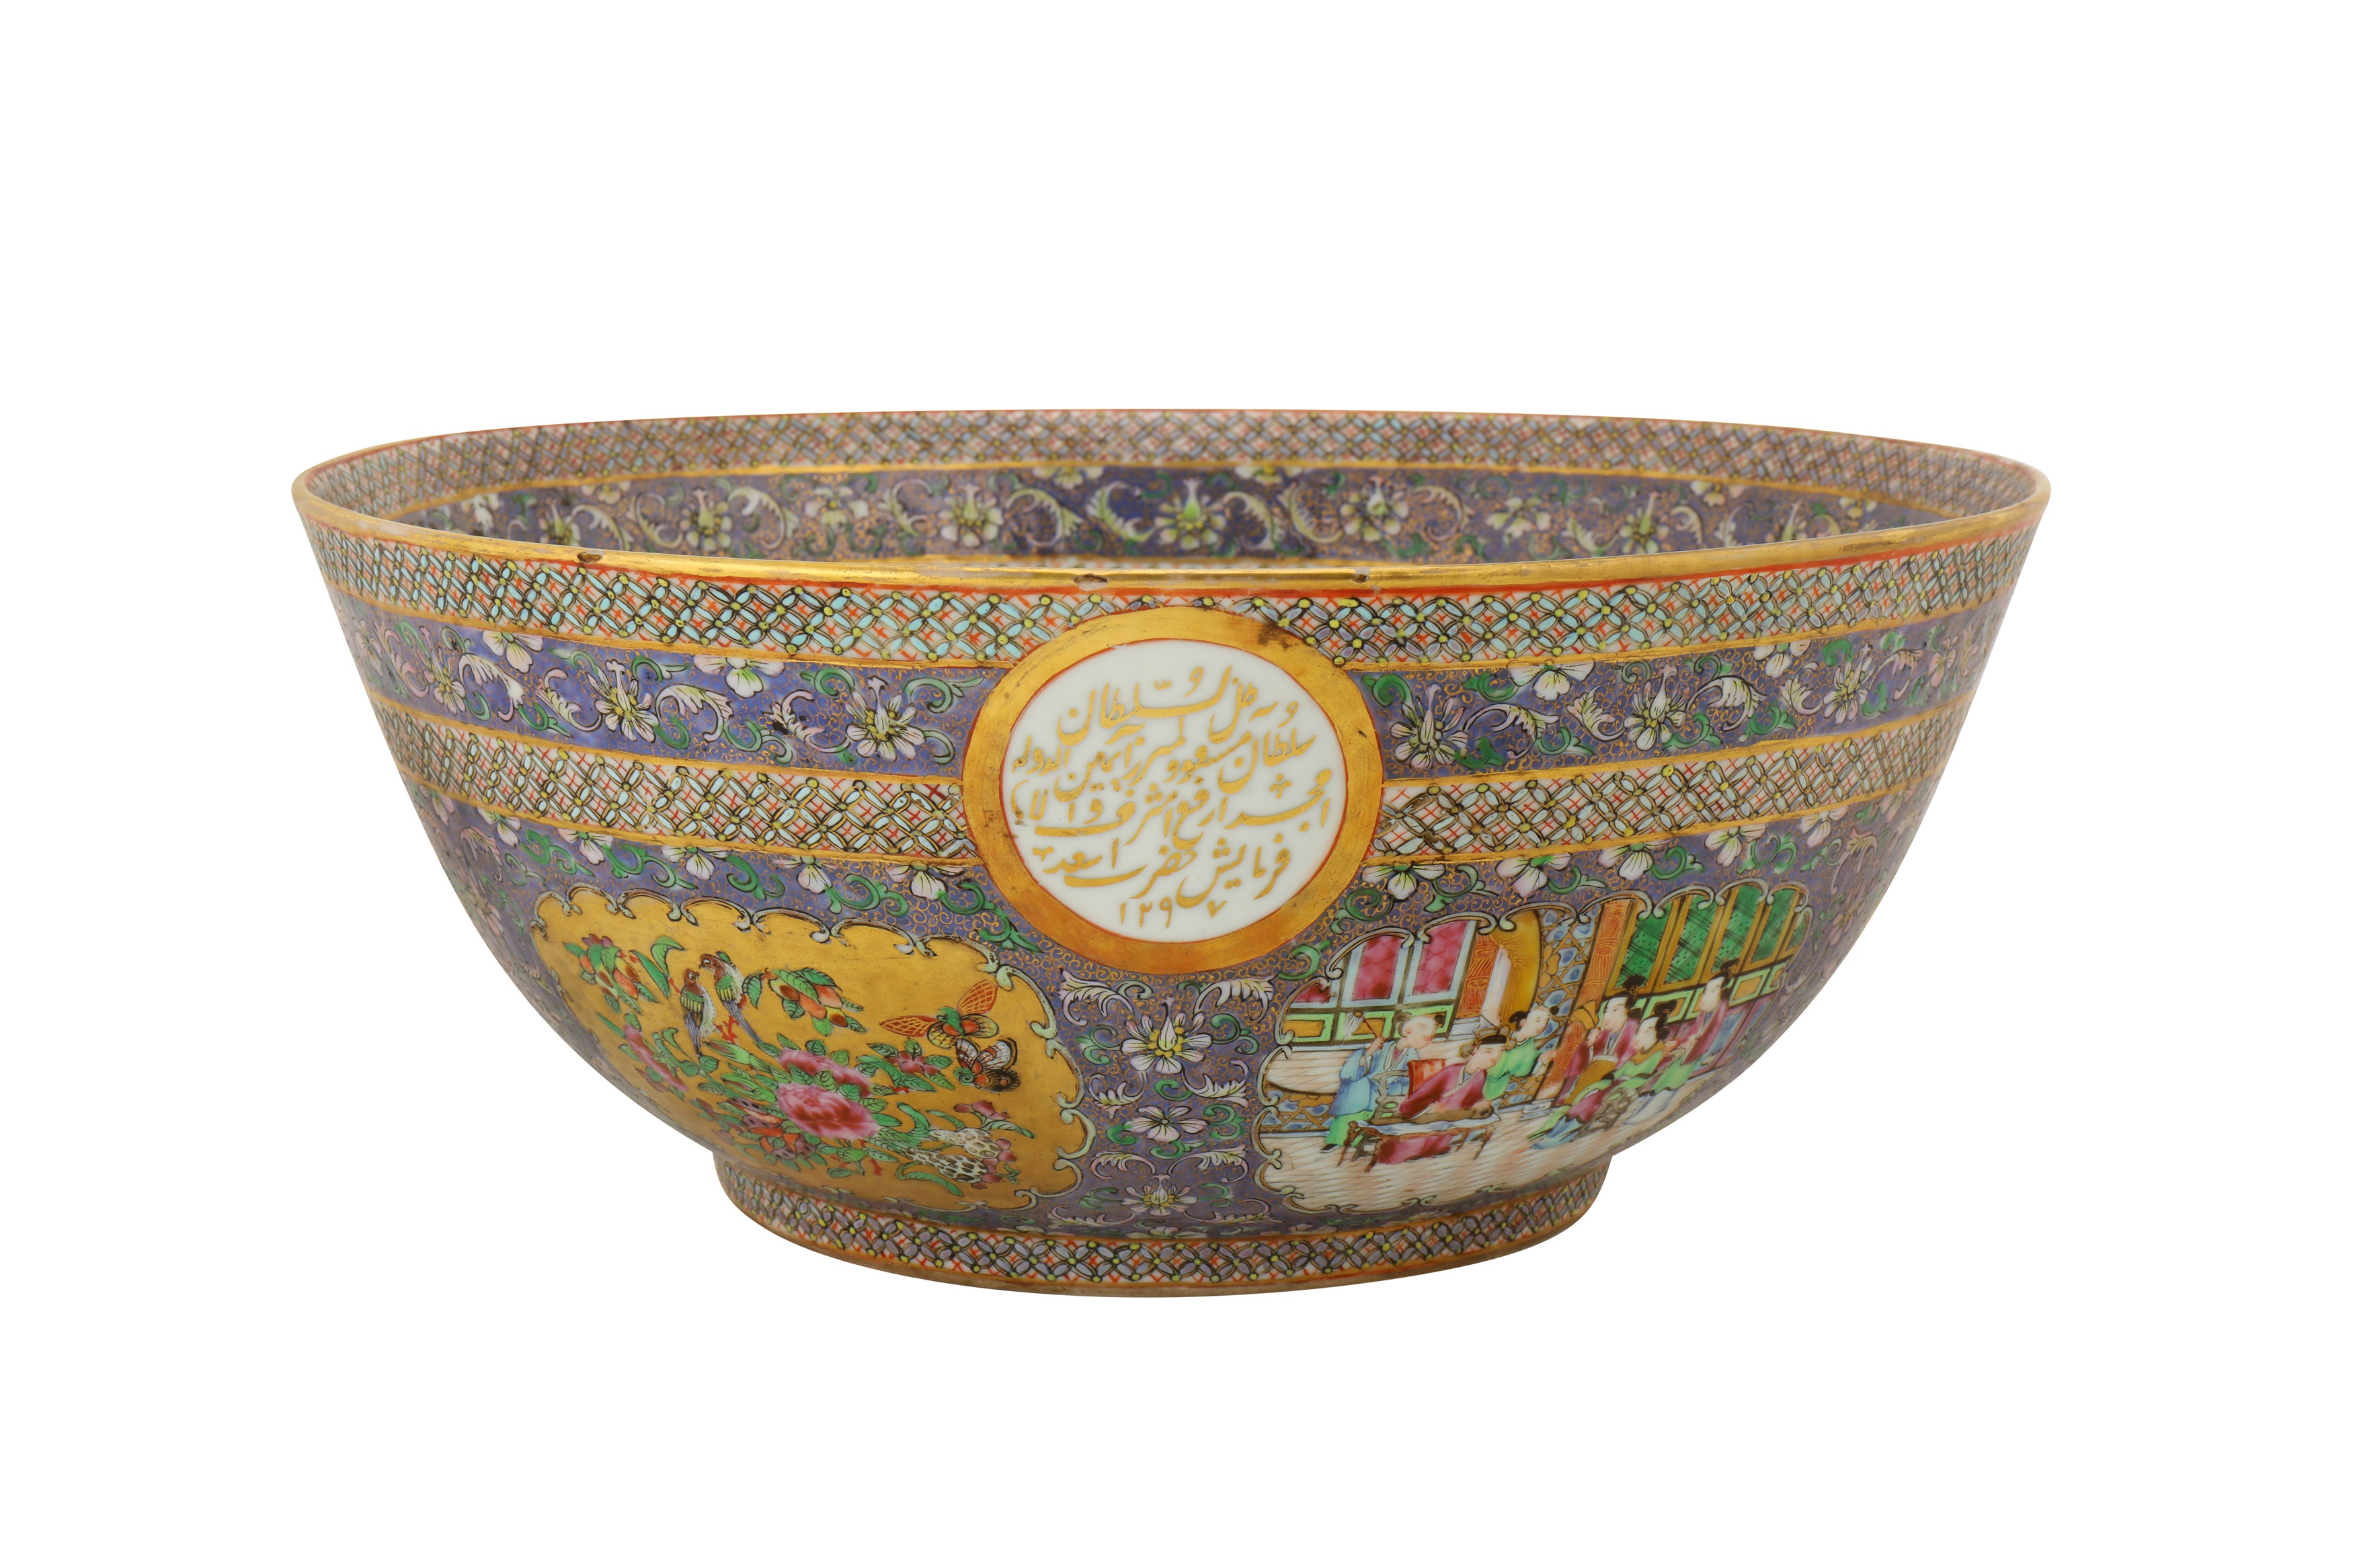 A LARGE BOWL AND DISH FROM THE ZILL AL-SULTAN CANTON PORCELAIN SERVICE - Image 3 of 8